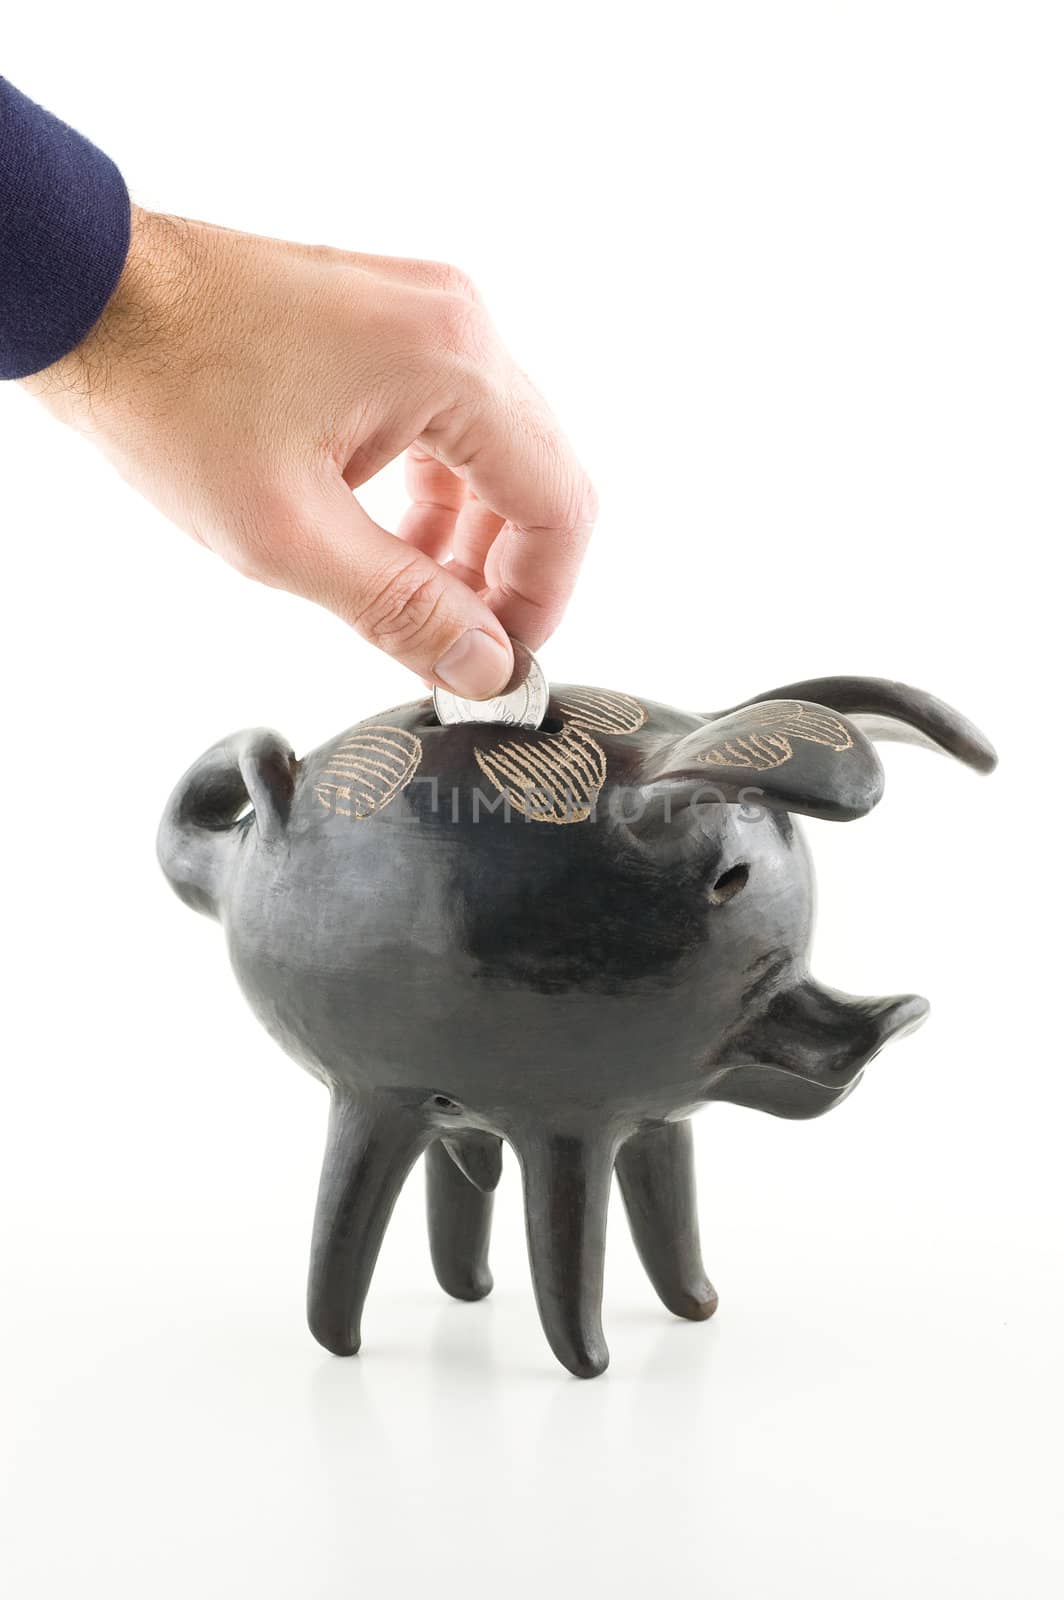 Male hand dropping a coin into a black piggy bank, white background.